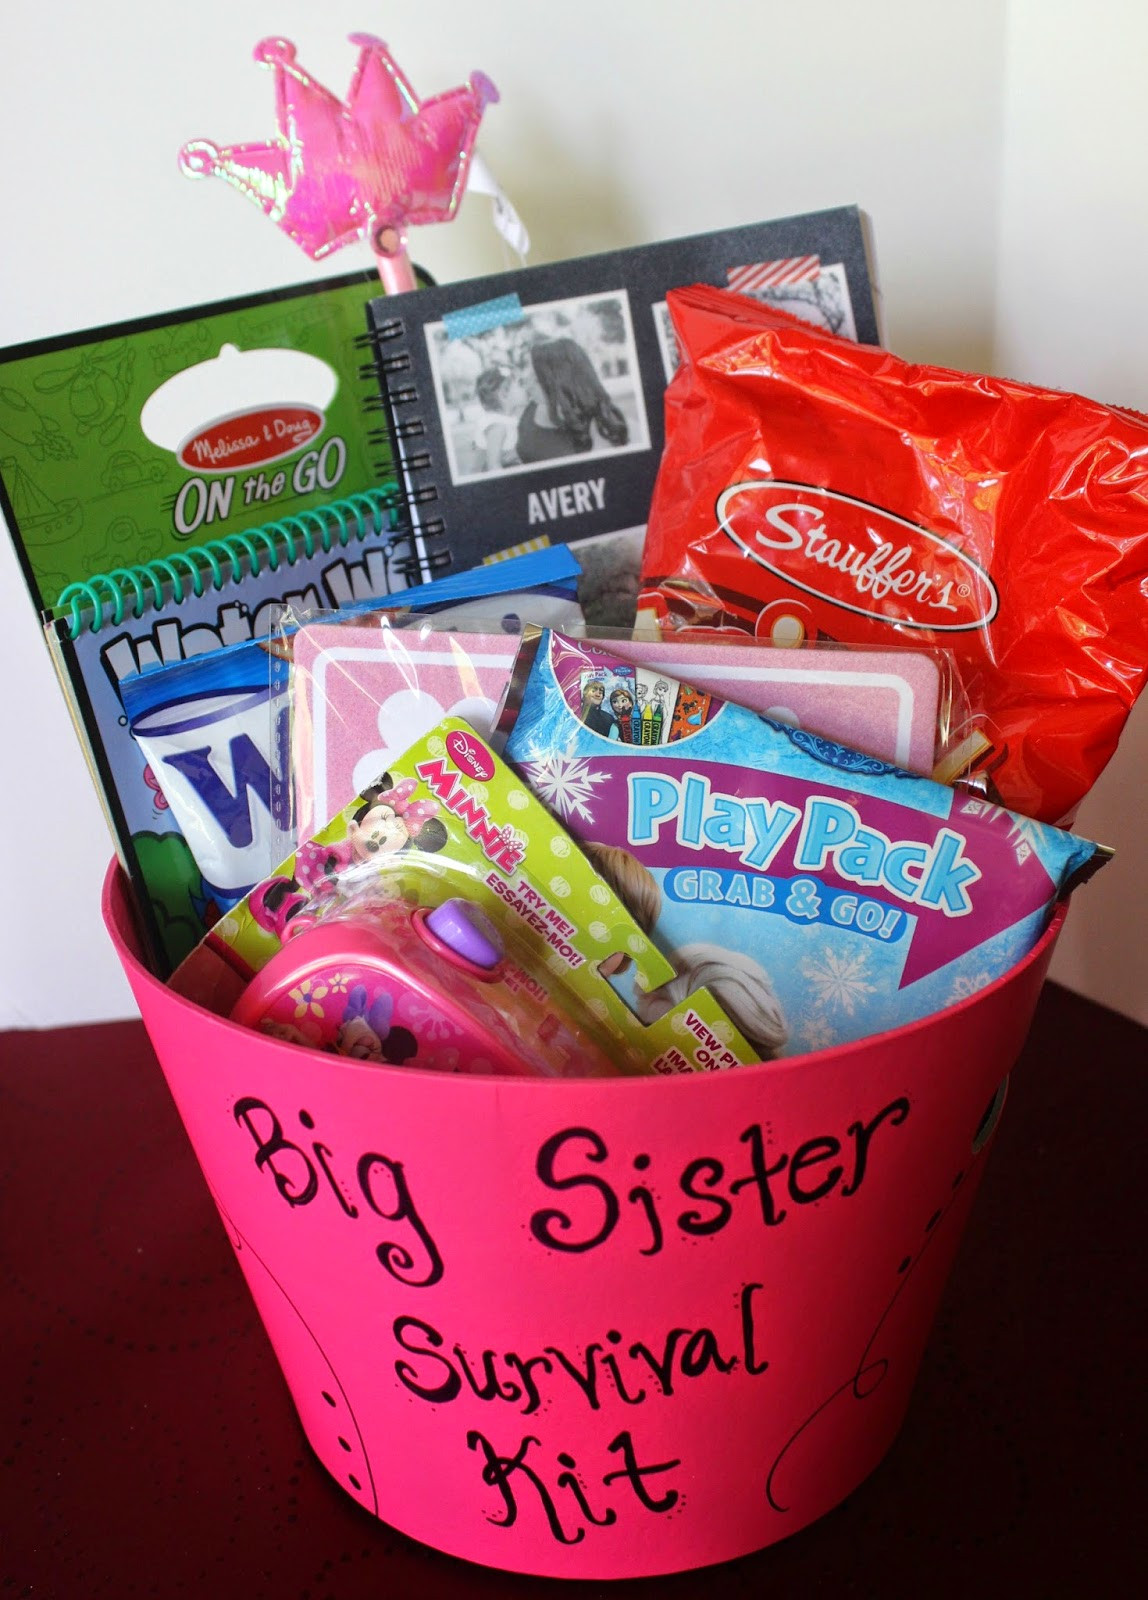 Gift Ideas For Big Sister From New Baby
 simply made with love Big Sister Survival Kit